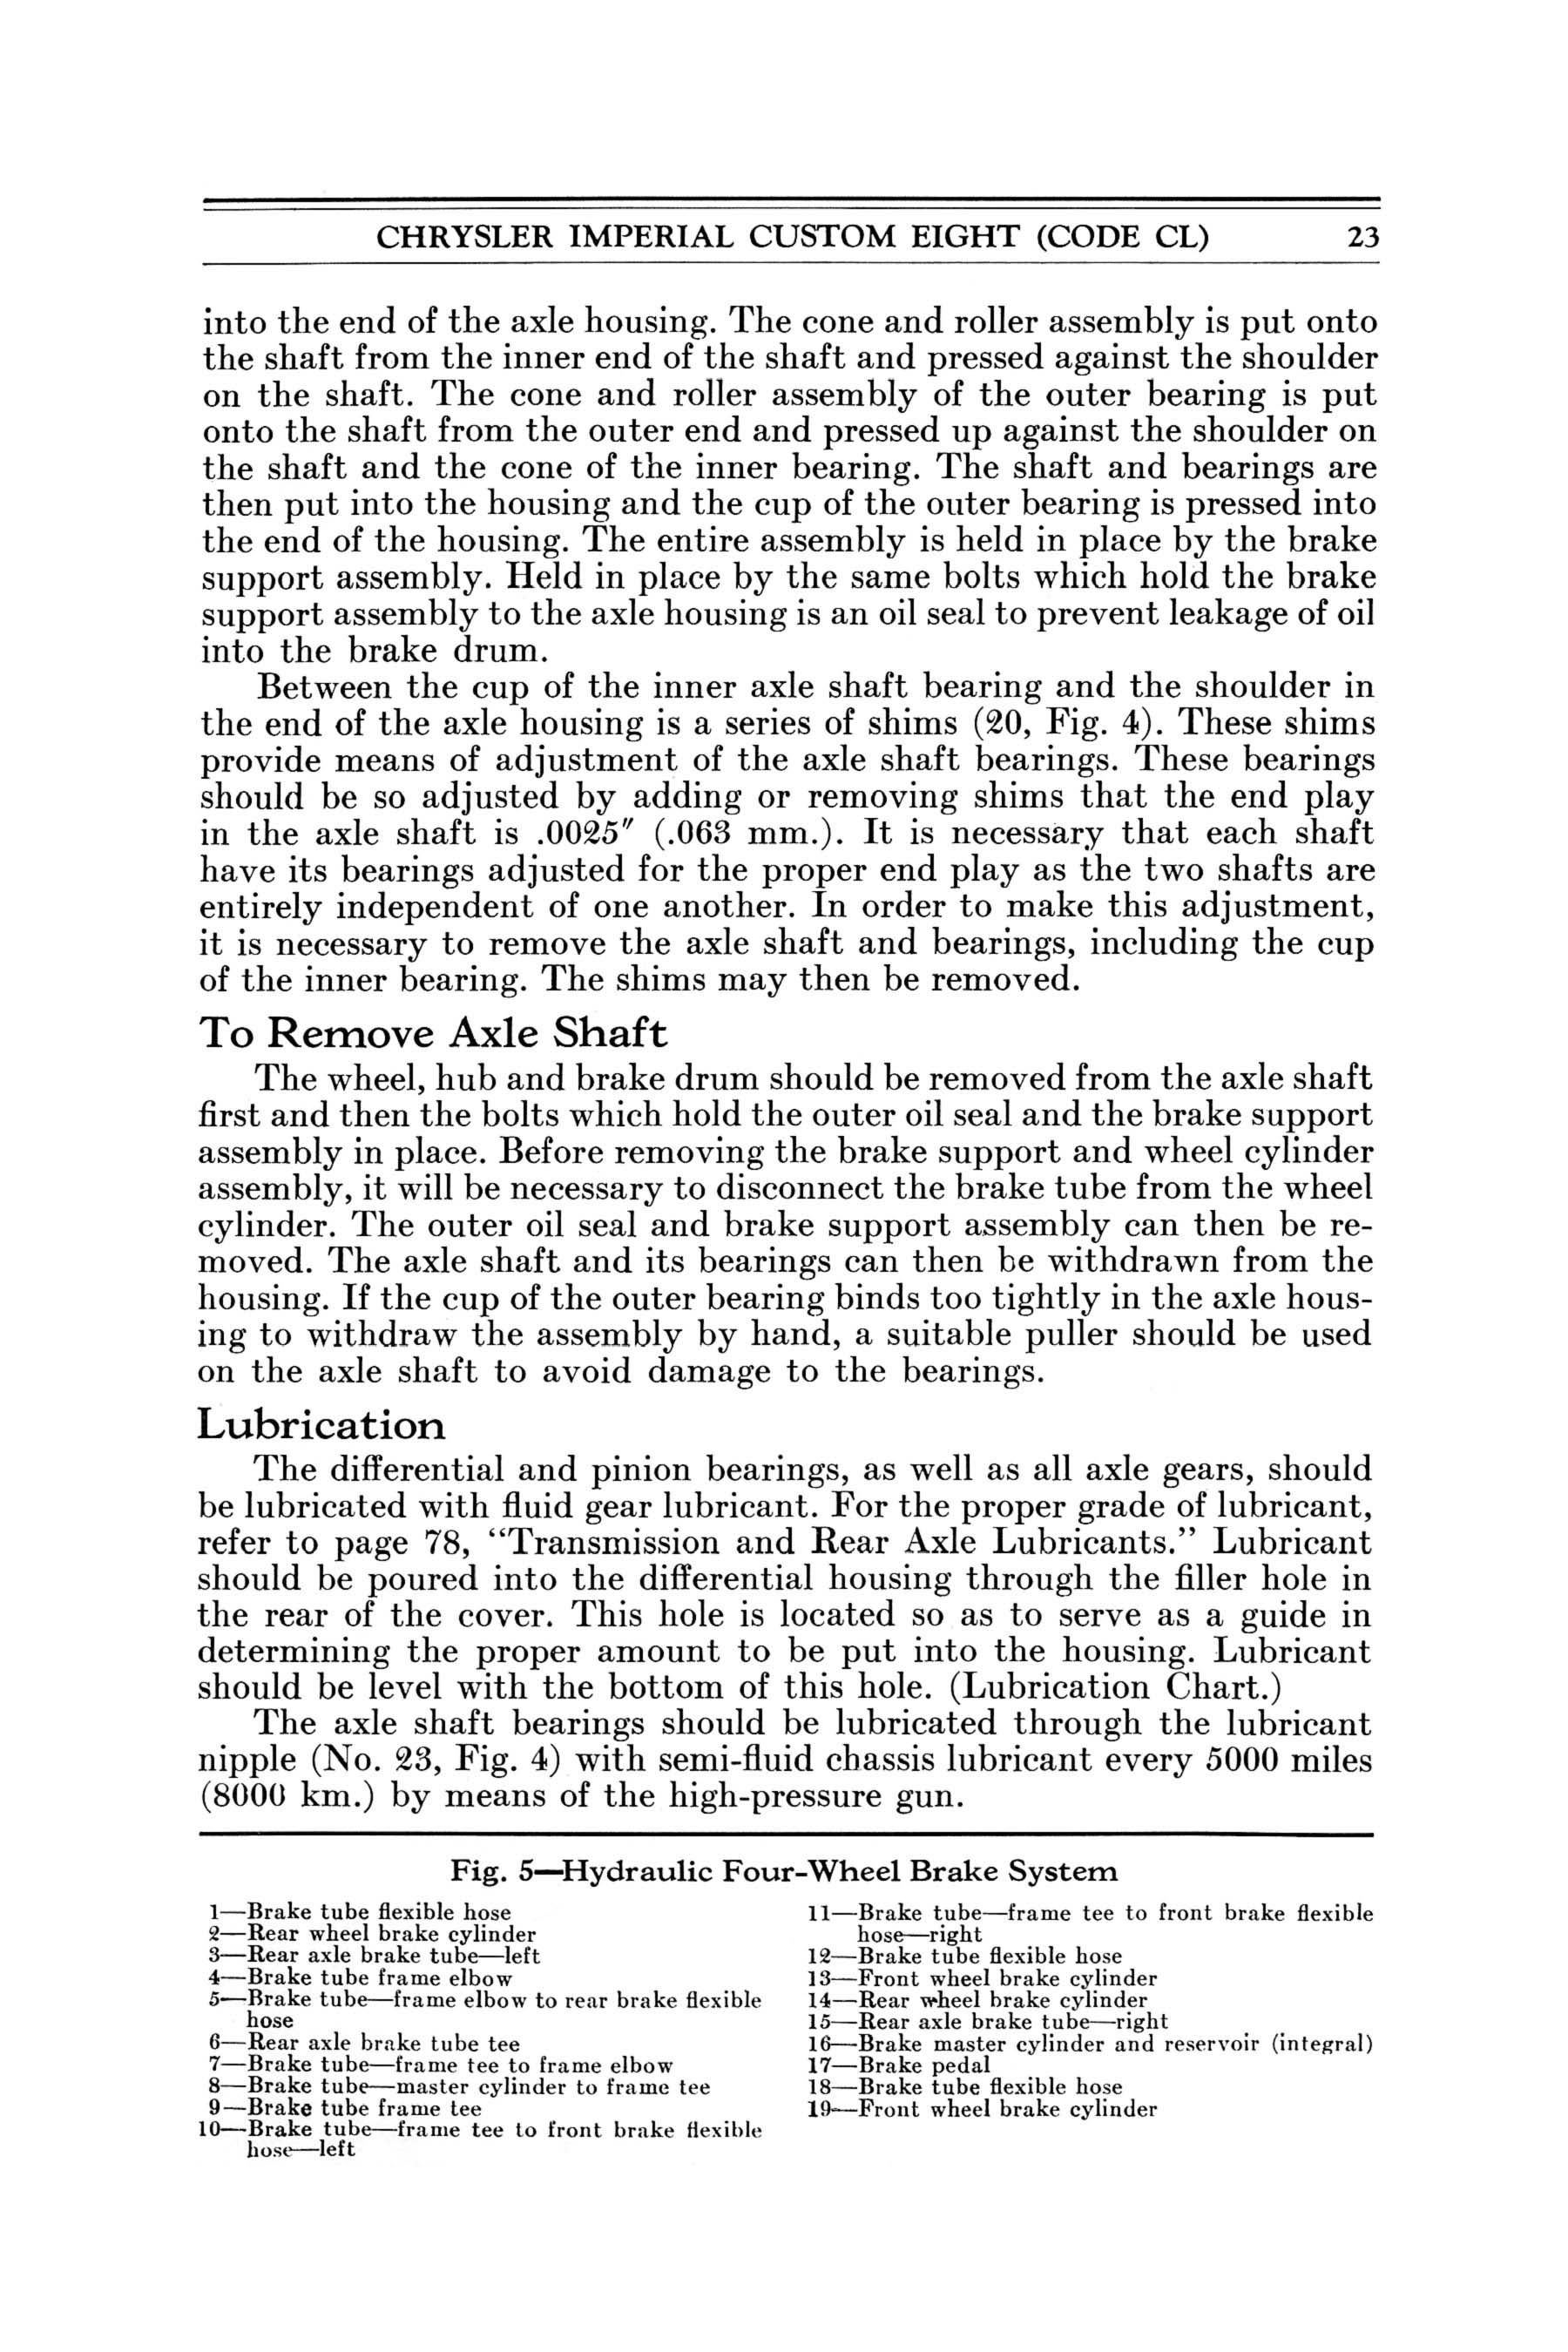 1932 Chrysler Imperial Instruction Book Page 80